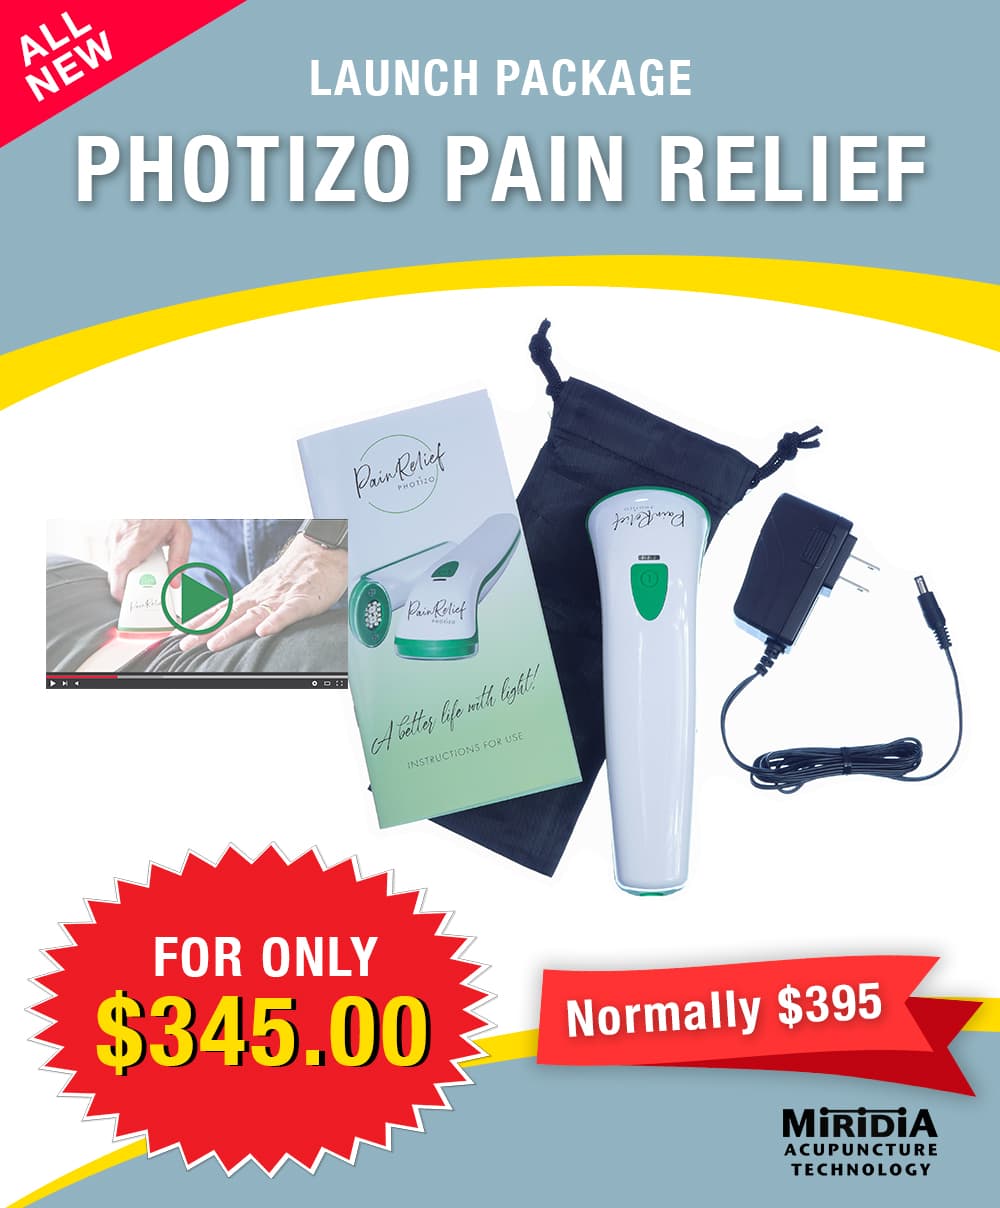 Photizo Pain Relief Special Offer